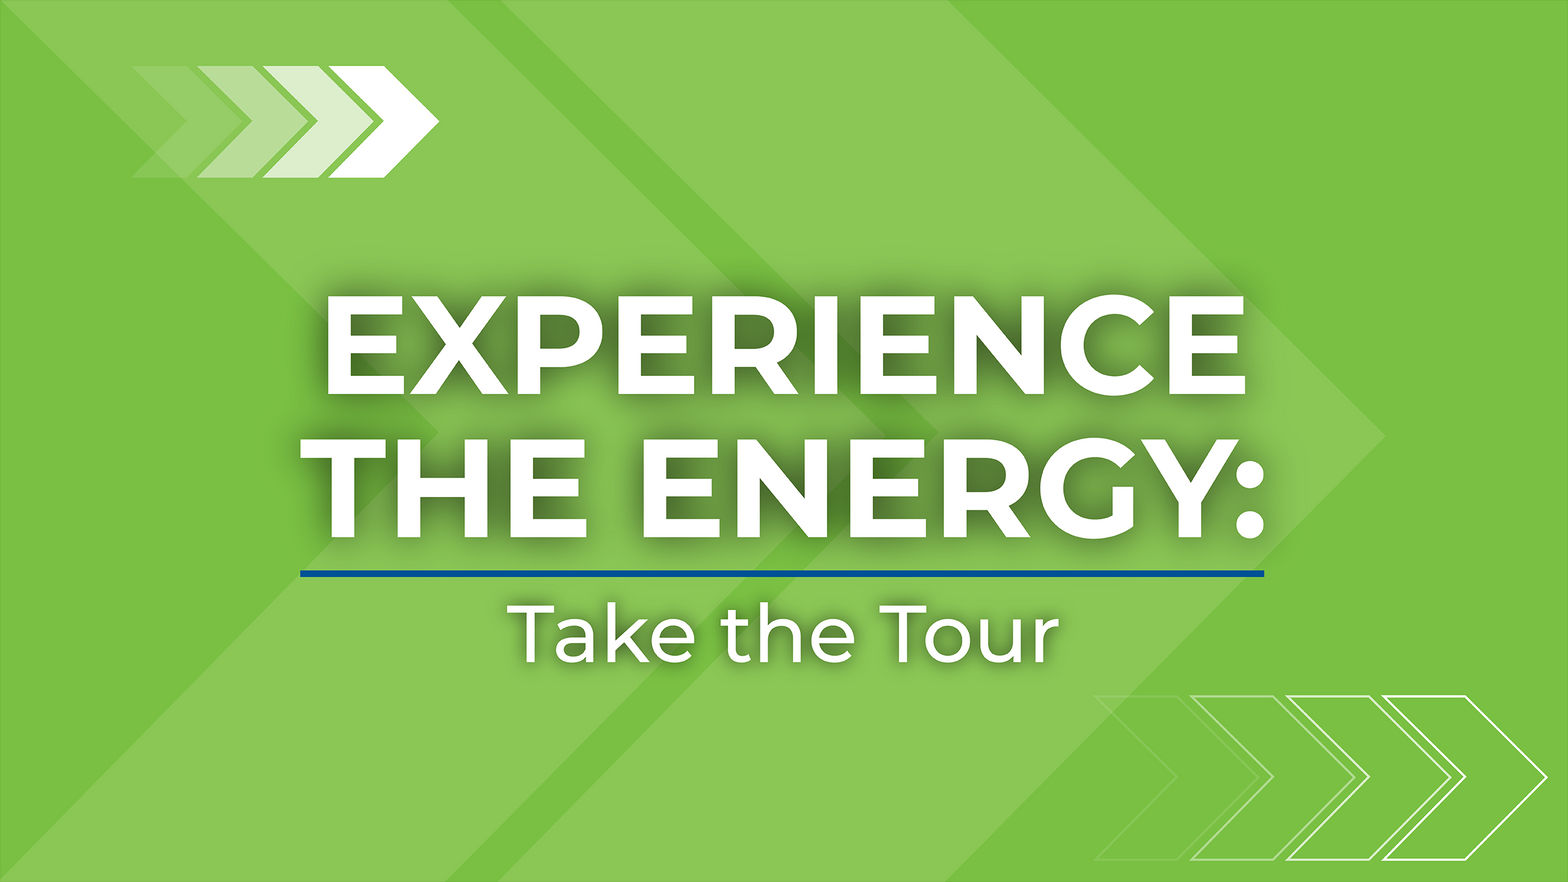 Experience the Energy: Take the Tour